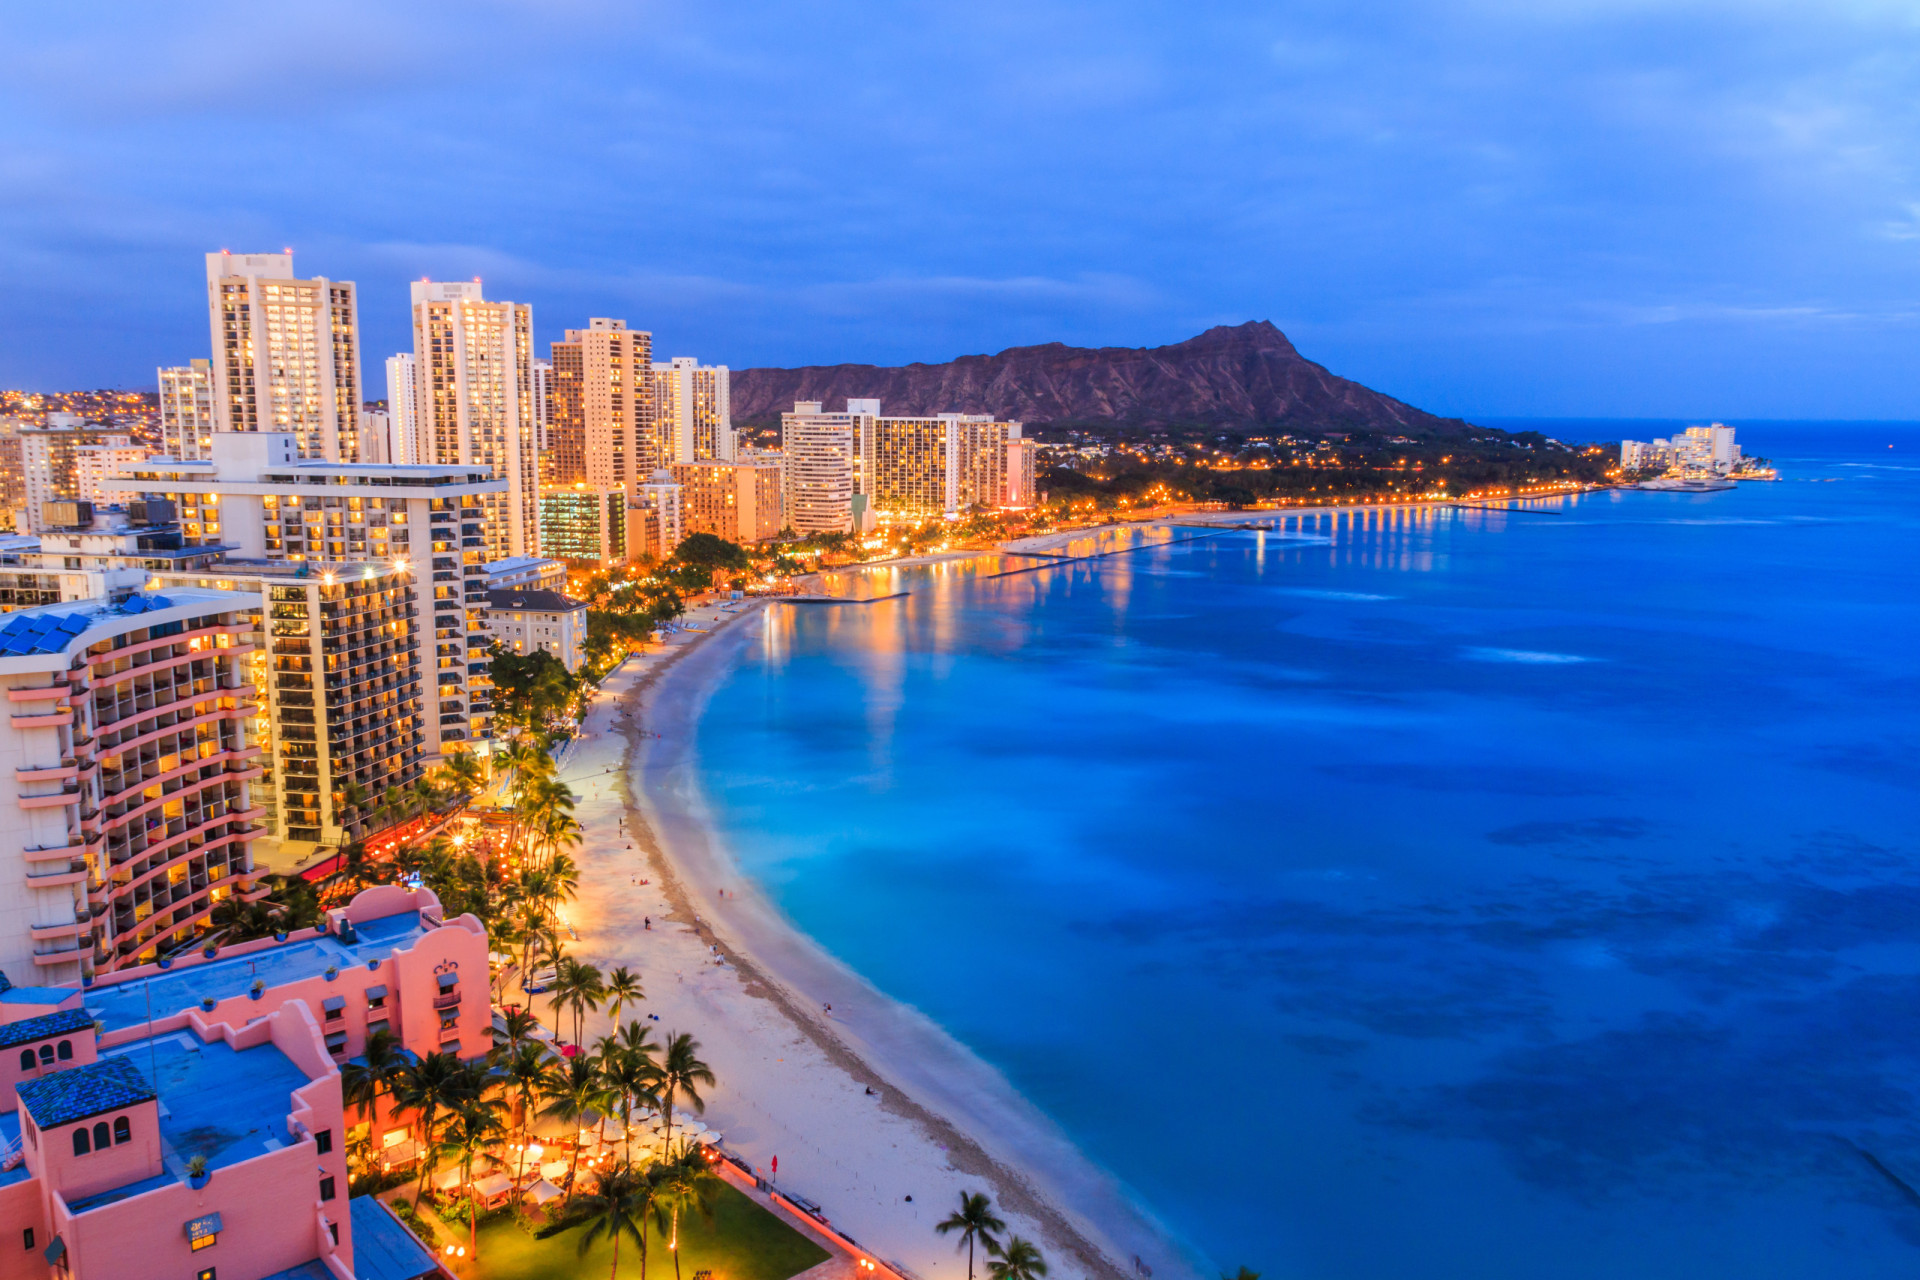 <p>Honolulu, paradise personified, has a rent index of 62.0. As Hawaii's vibrant capital, it's known for its stunning beaches and tourism-driven economy, making it an expensive but desirable place to live.</p><p><a href="https://www.msn.com/en-in/community/channel/vid-7xx8mnucu55yw63we9va2gwr7uihbxwc68fxqp25x6tg4ftibpra?cvid=94631541bc0f4f89bfd59158d696ad7e">Follow us and access great exclusive content every day</a></p>